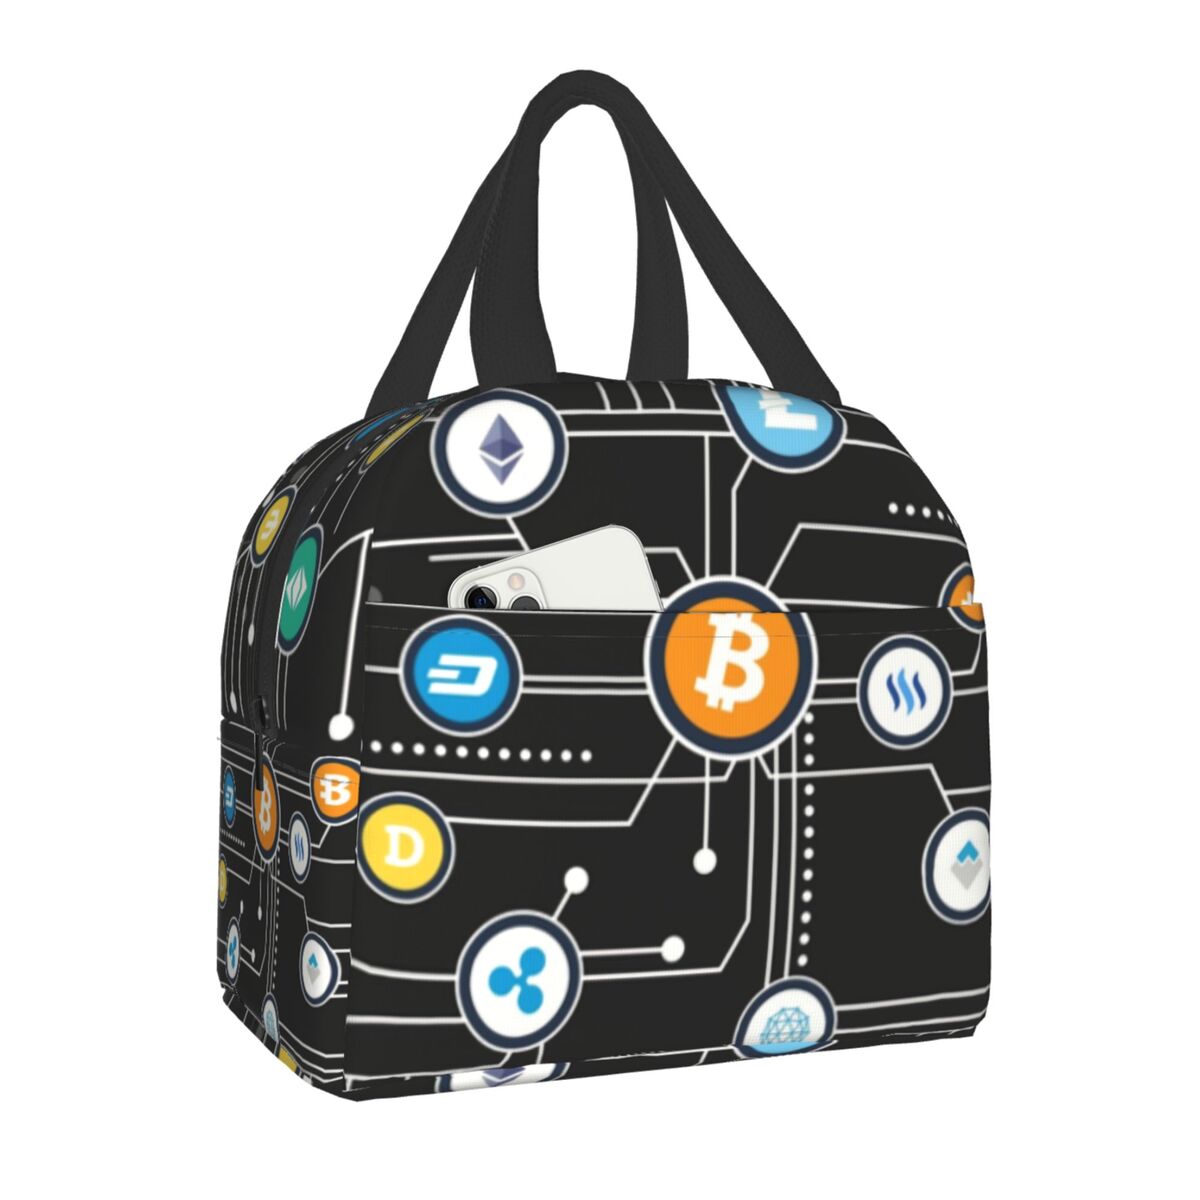 Cryptocurrency Bitcoin Altcoin  Lunch Bag,